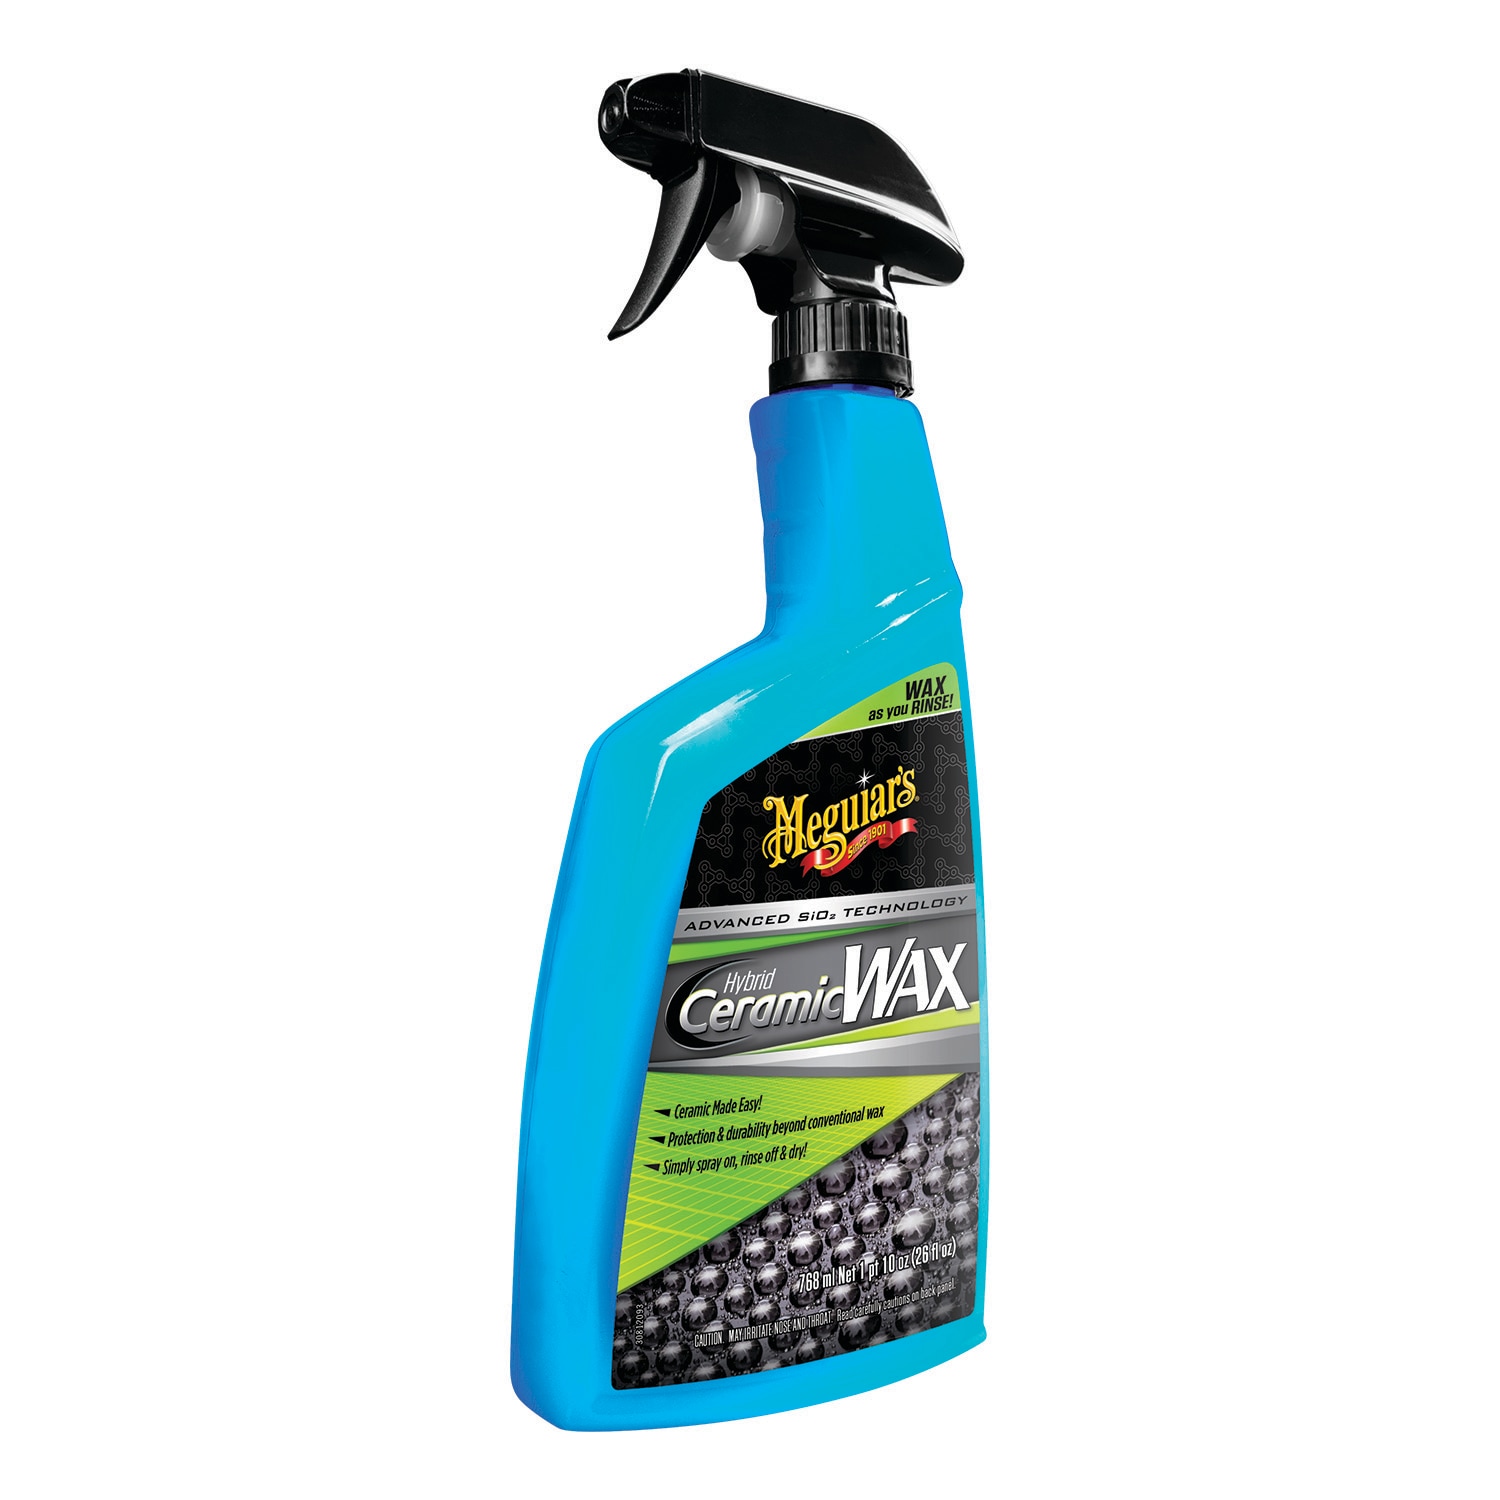 Hybrid Solutions Wash, Wax & Interior Cleaning Kit